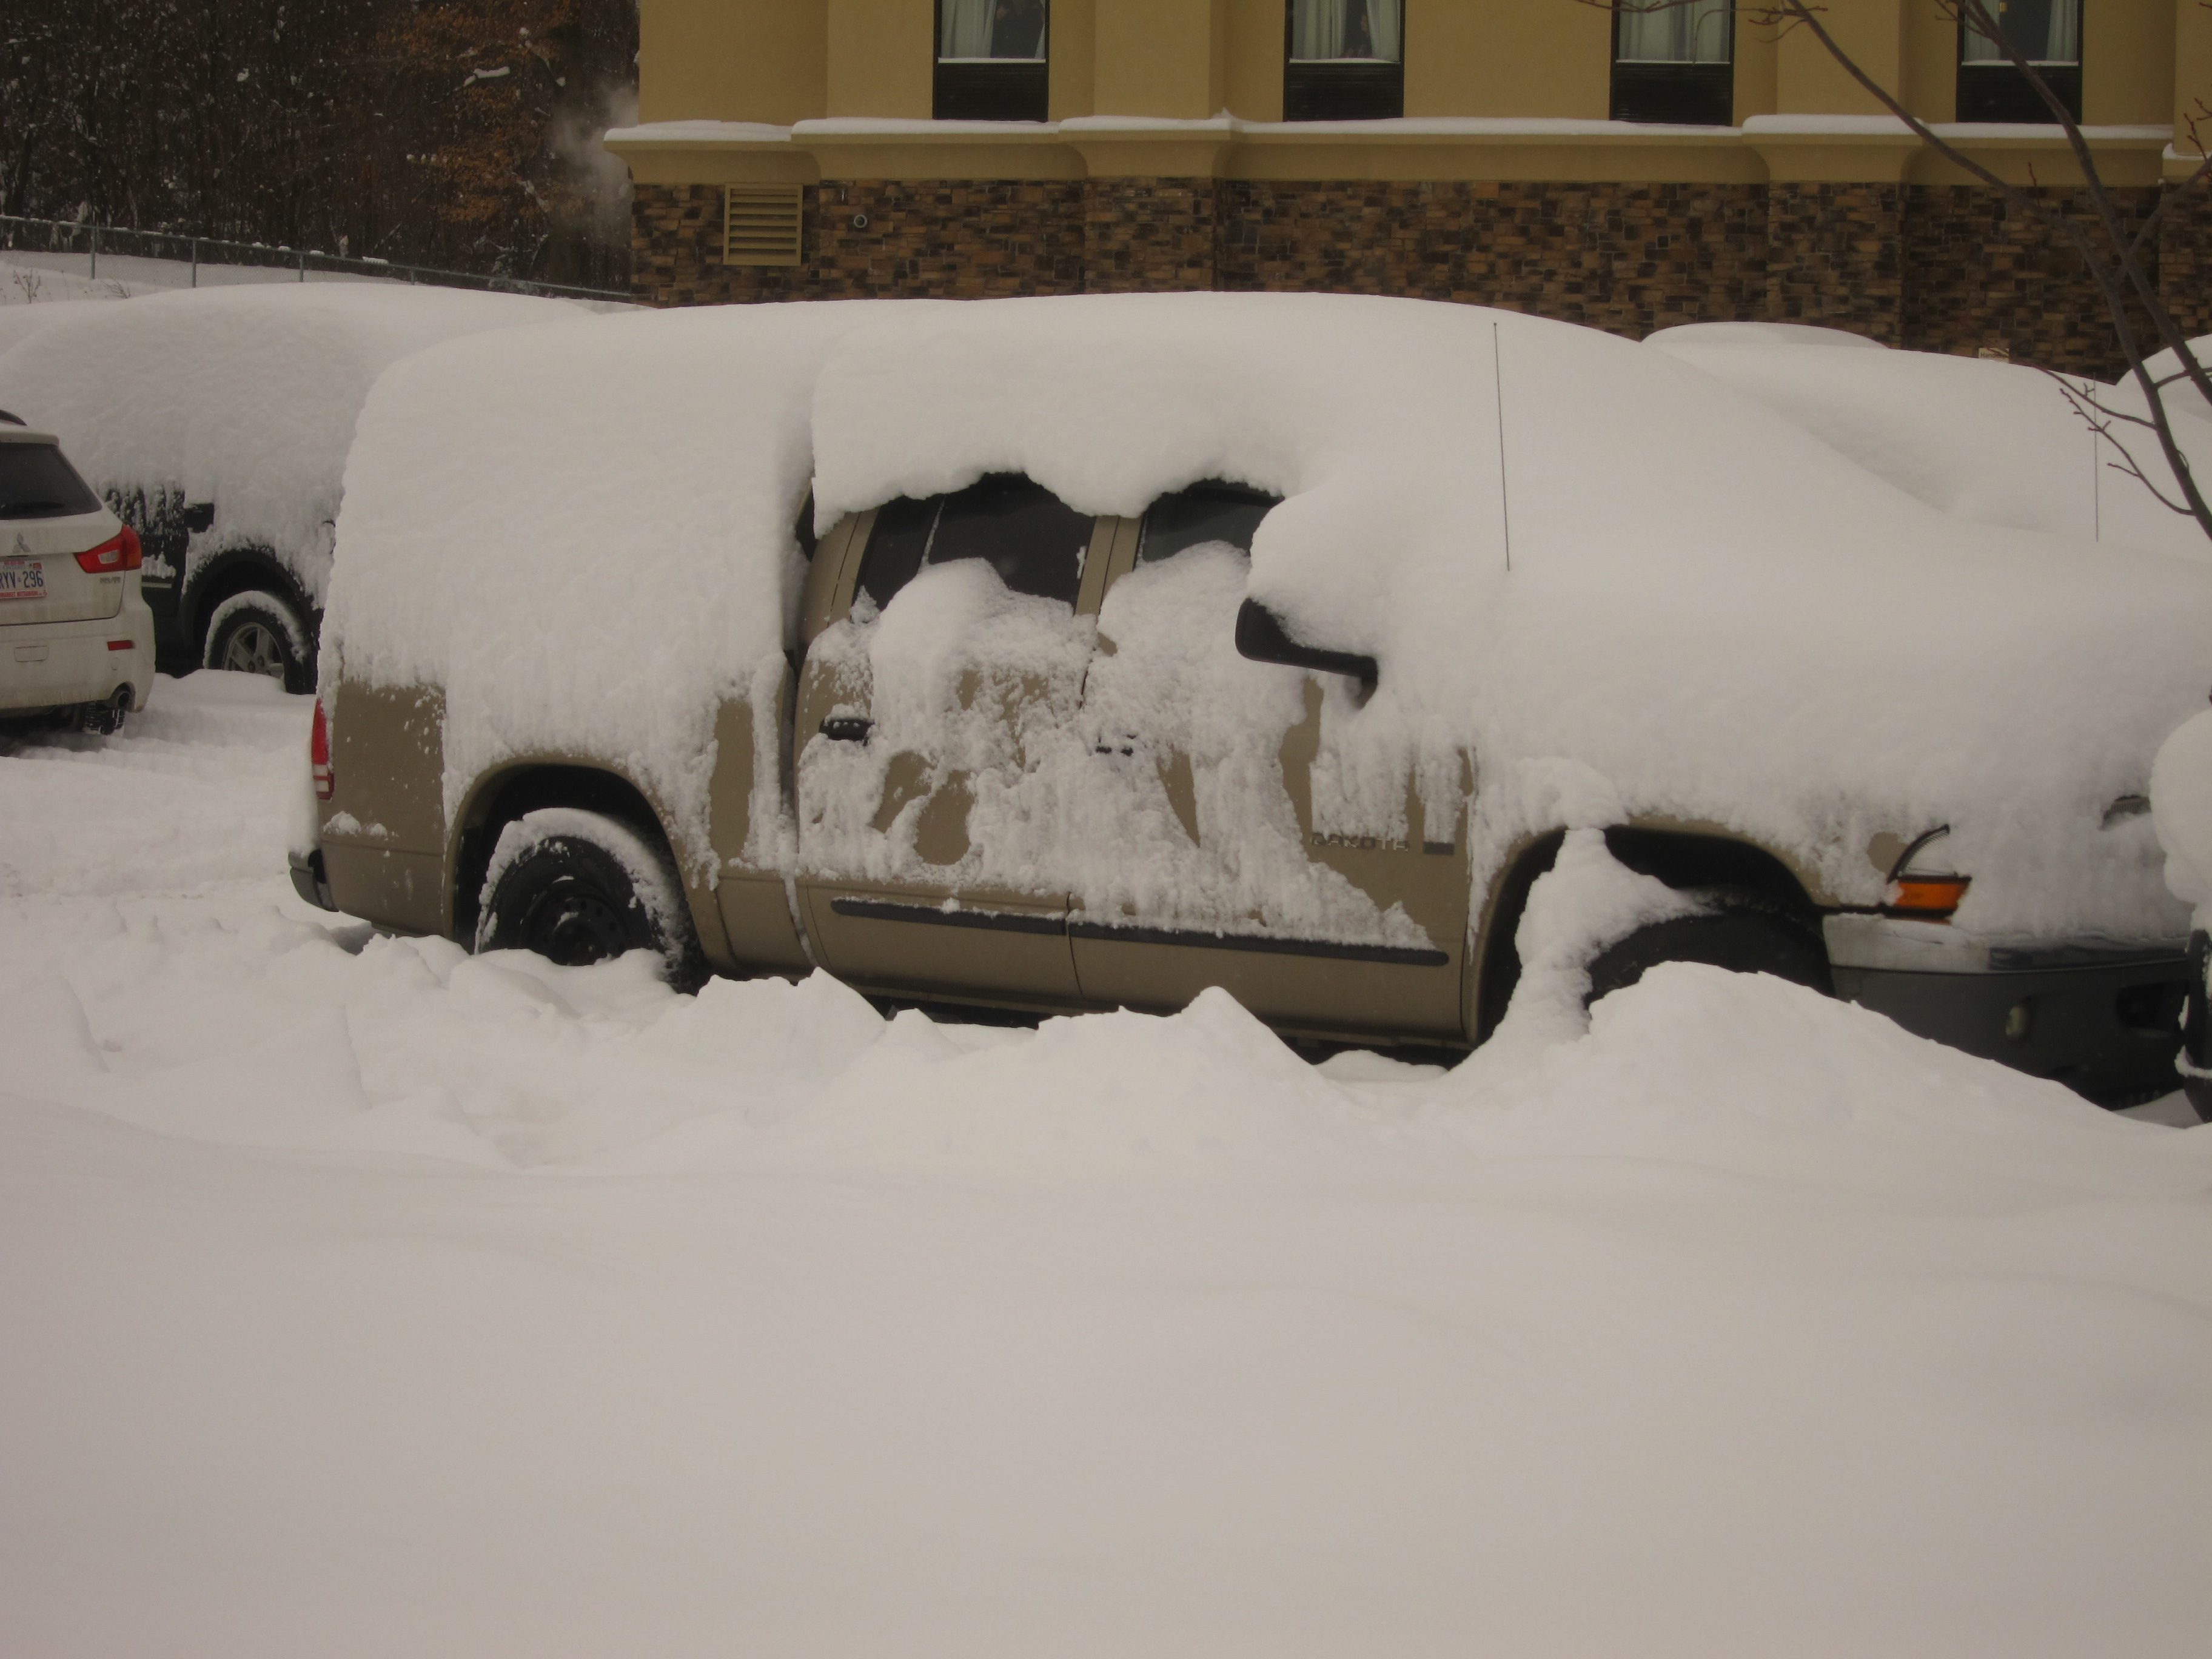 Car Buried in Snow